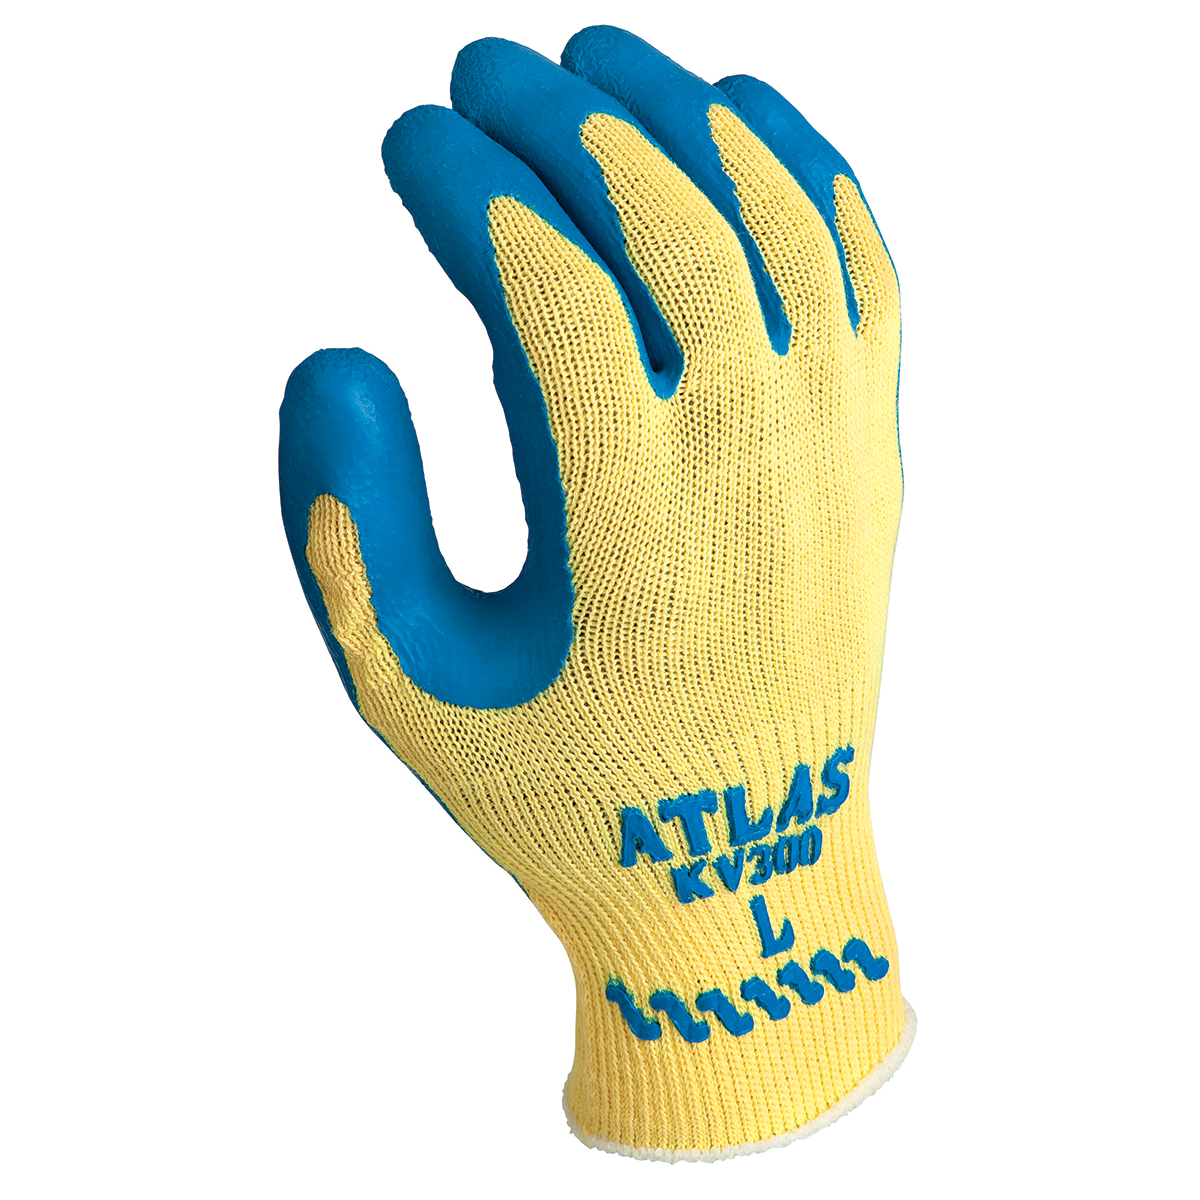 Cut resistant, natural rubber palm coating, yellow/blue coating,10 gauge seamless cut resistant Kevlar® liner, ergonomic shape, small ANSI CUT LEVEL A3